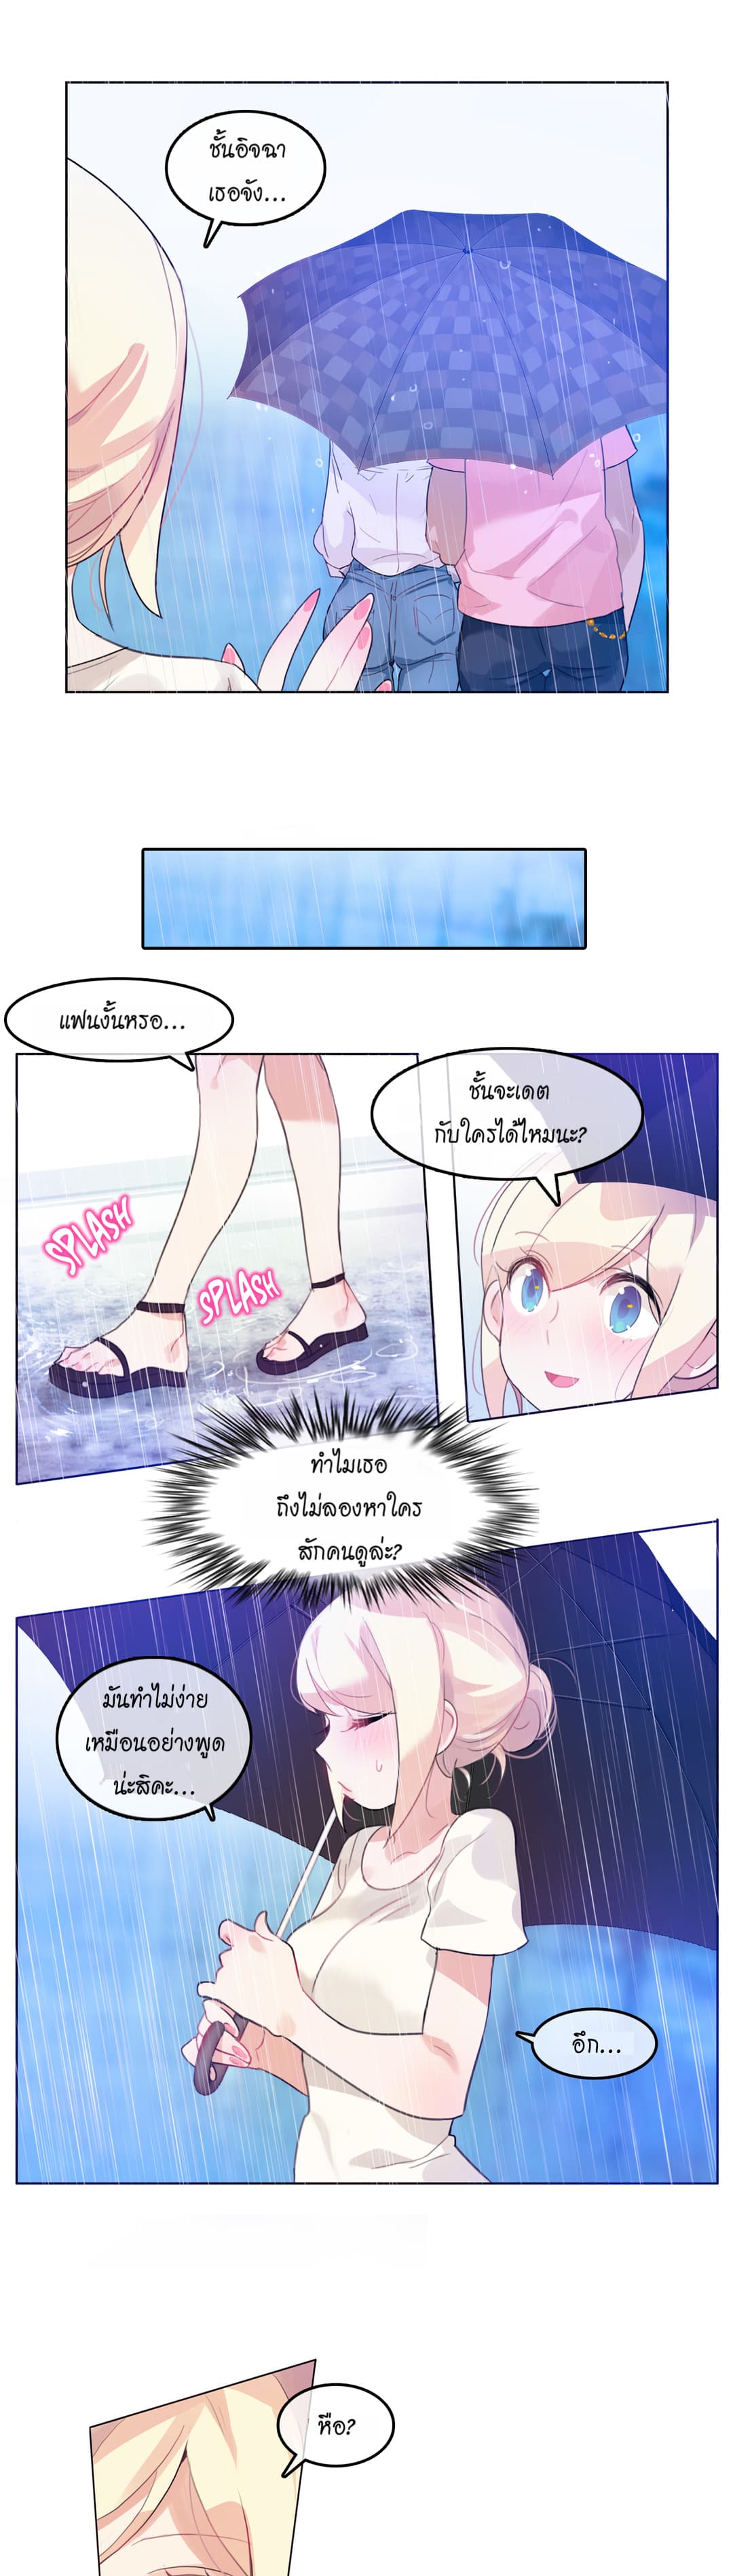 A Pervert’s Daily Life 12 (20)